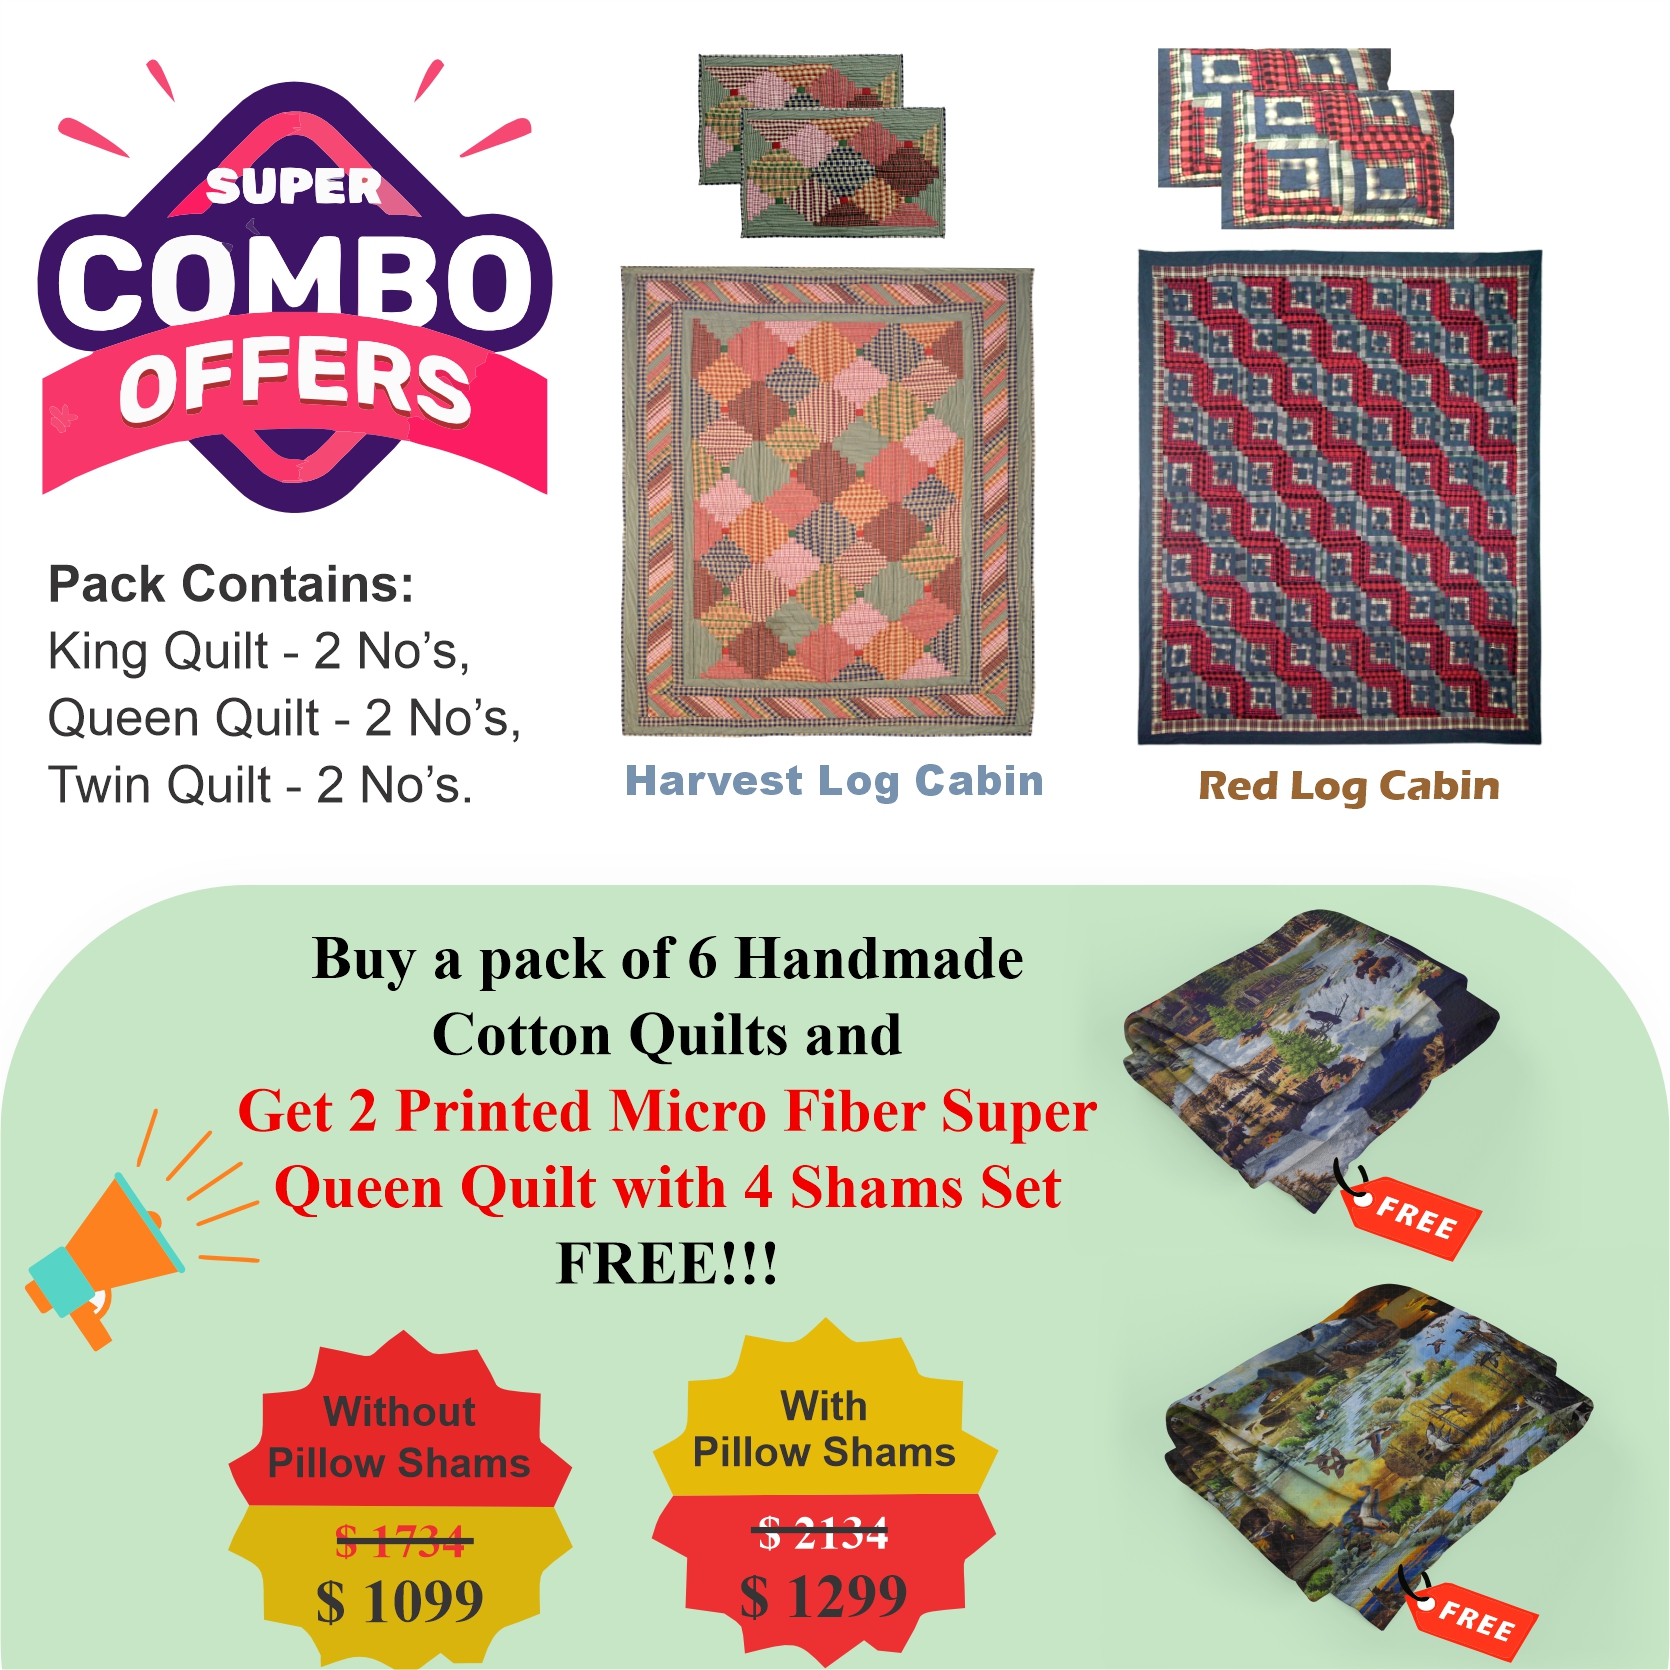 Harvest Log Cabin/Red Log Cabin  - Pack of 6 handmade cotton quilts | Matching Pillow shams | Buy 6 cotton quilts and get 2 Printed Microfiber Super Queen Quilt with 4 Shams